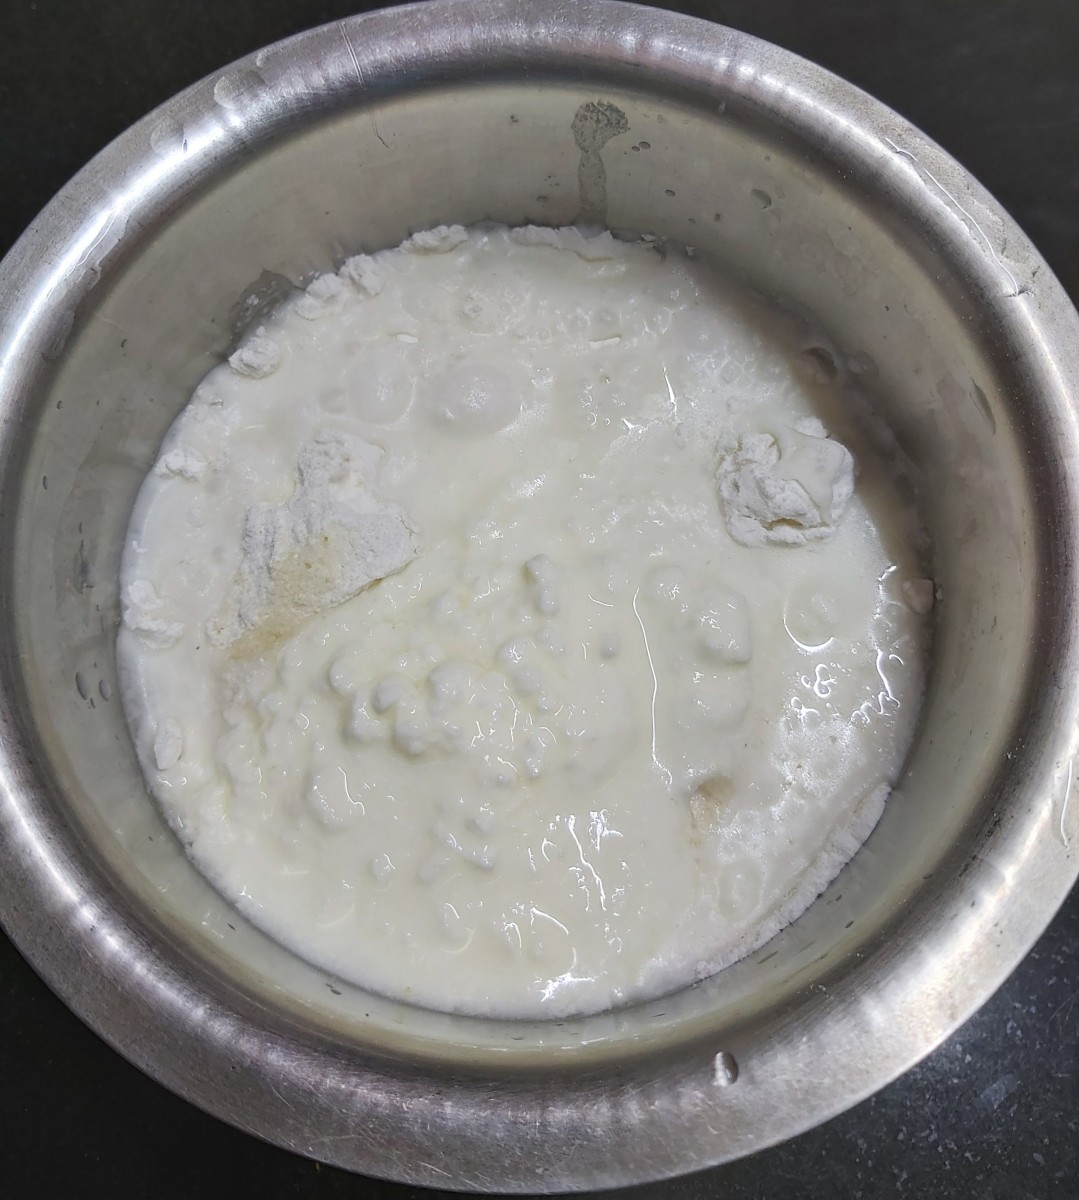 Add the curd and salt to taste (avoid sour curd).